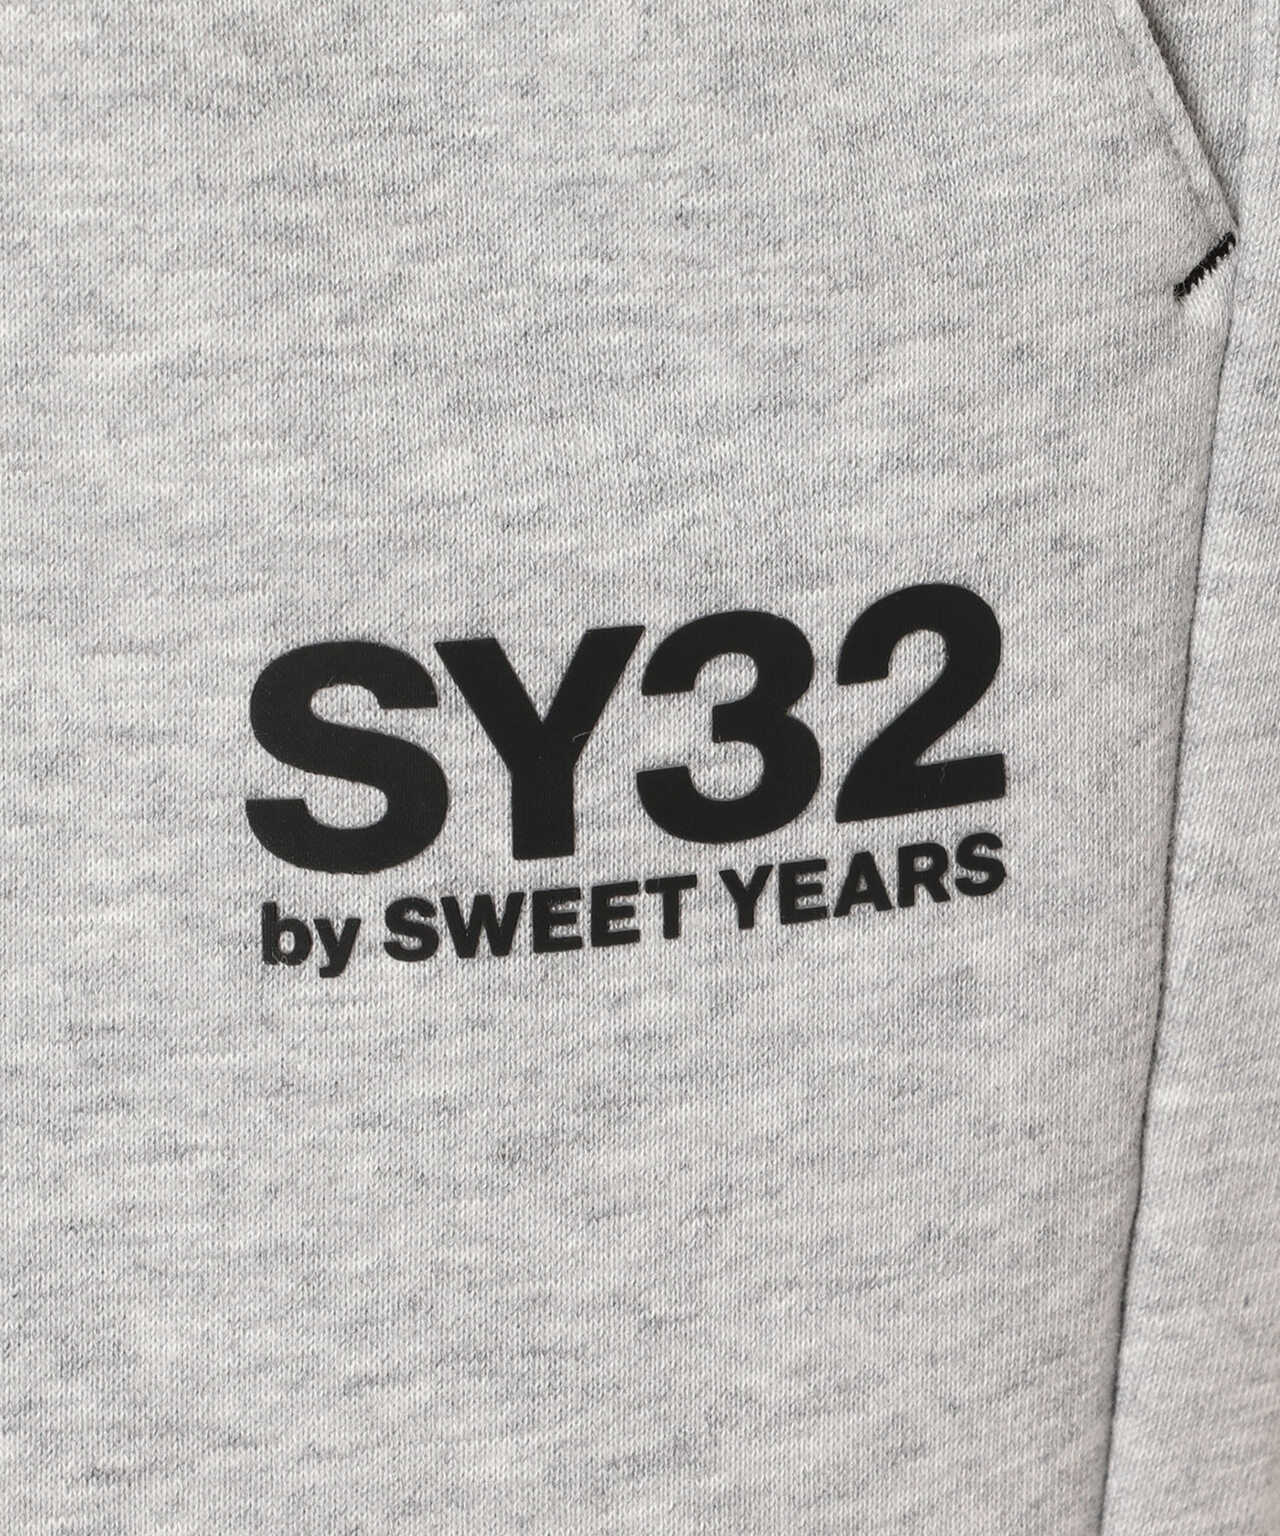 SY32 by SWEETYEARS /エスワイサーティトゥバイ スィートイヤーズ